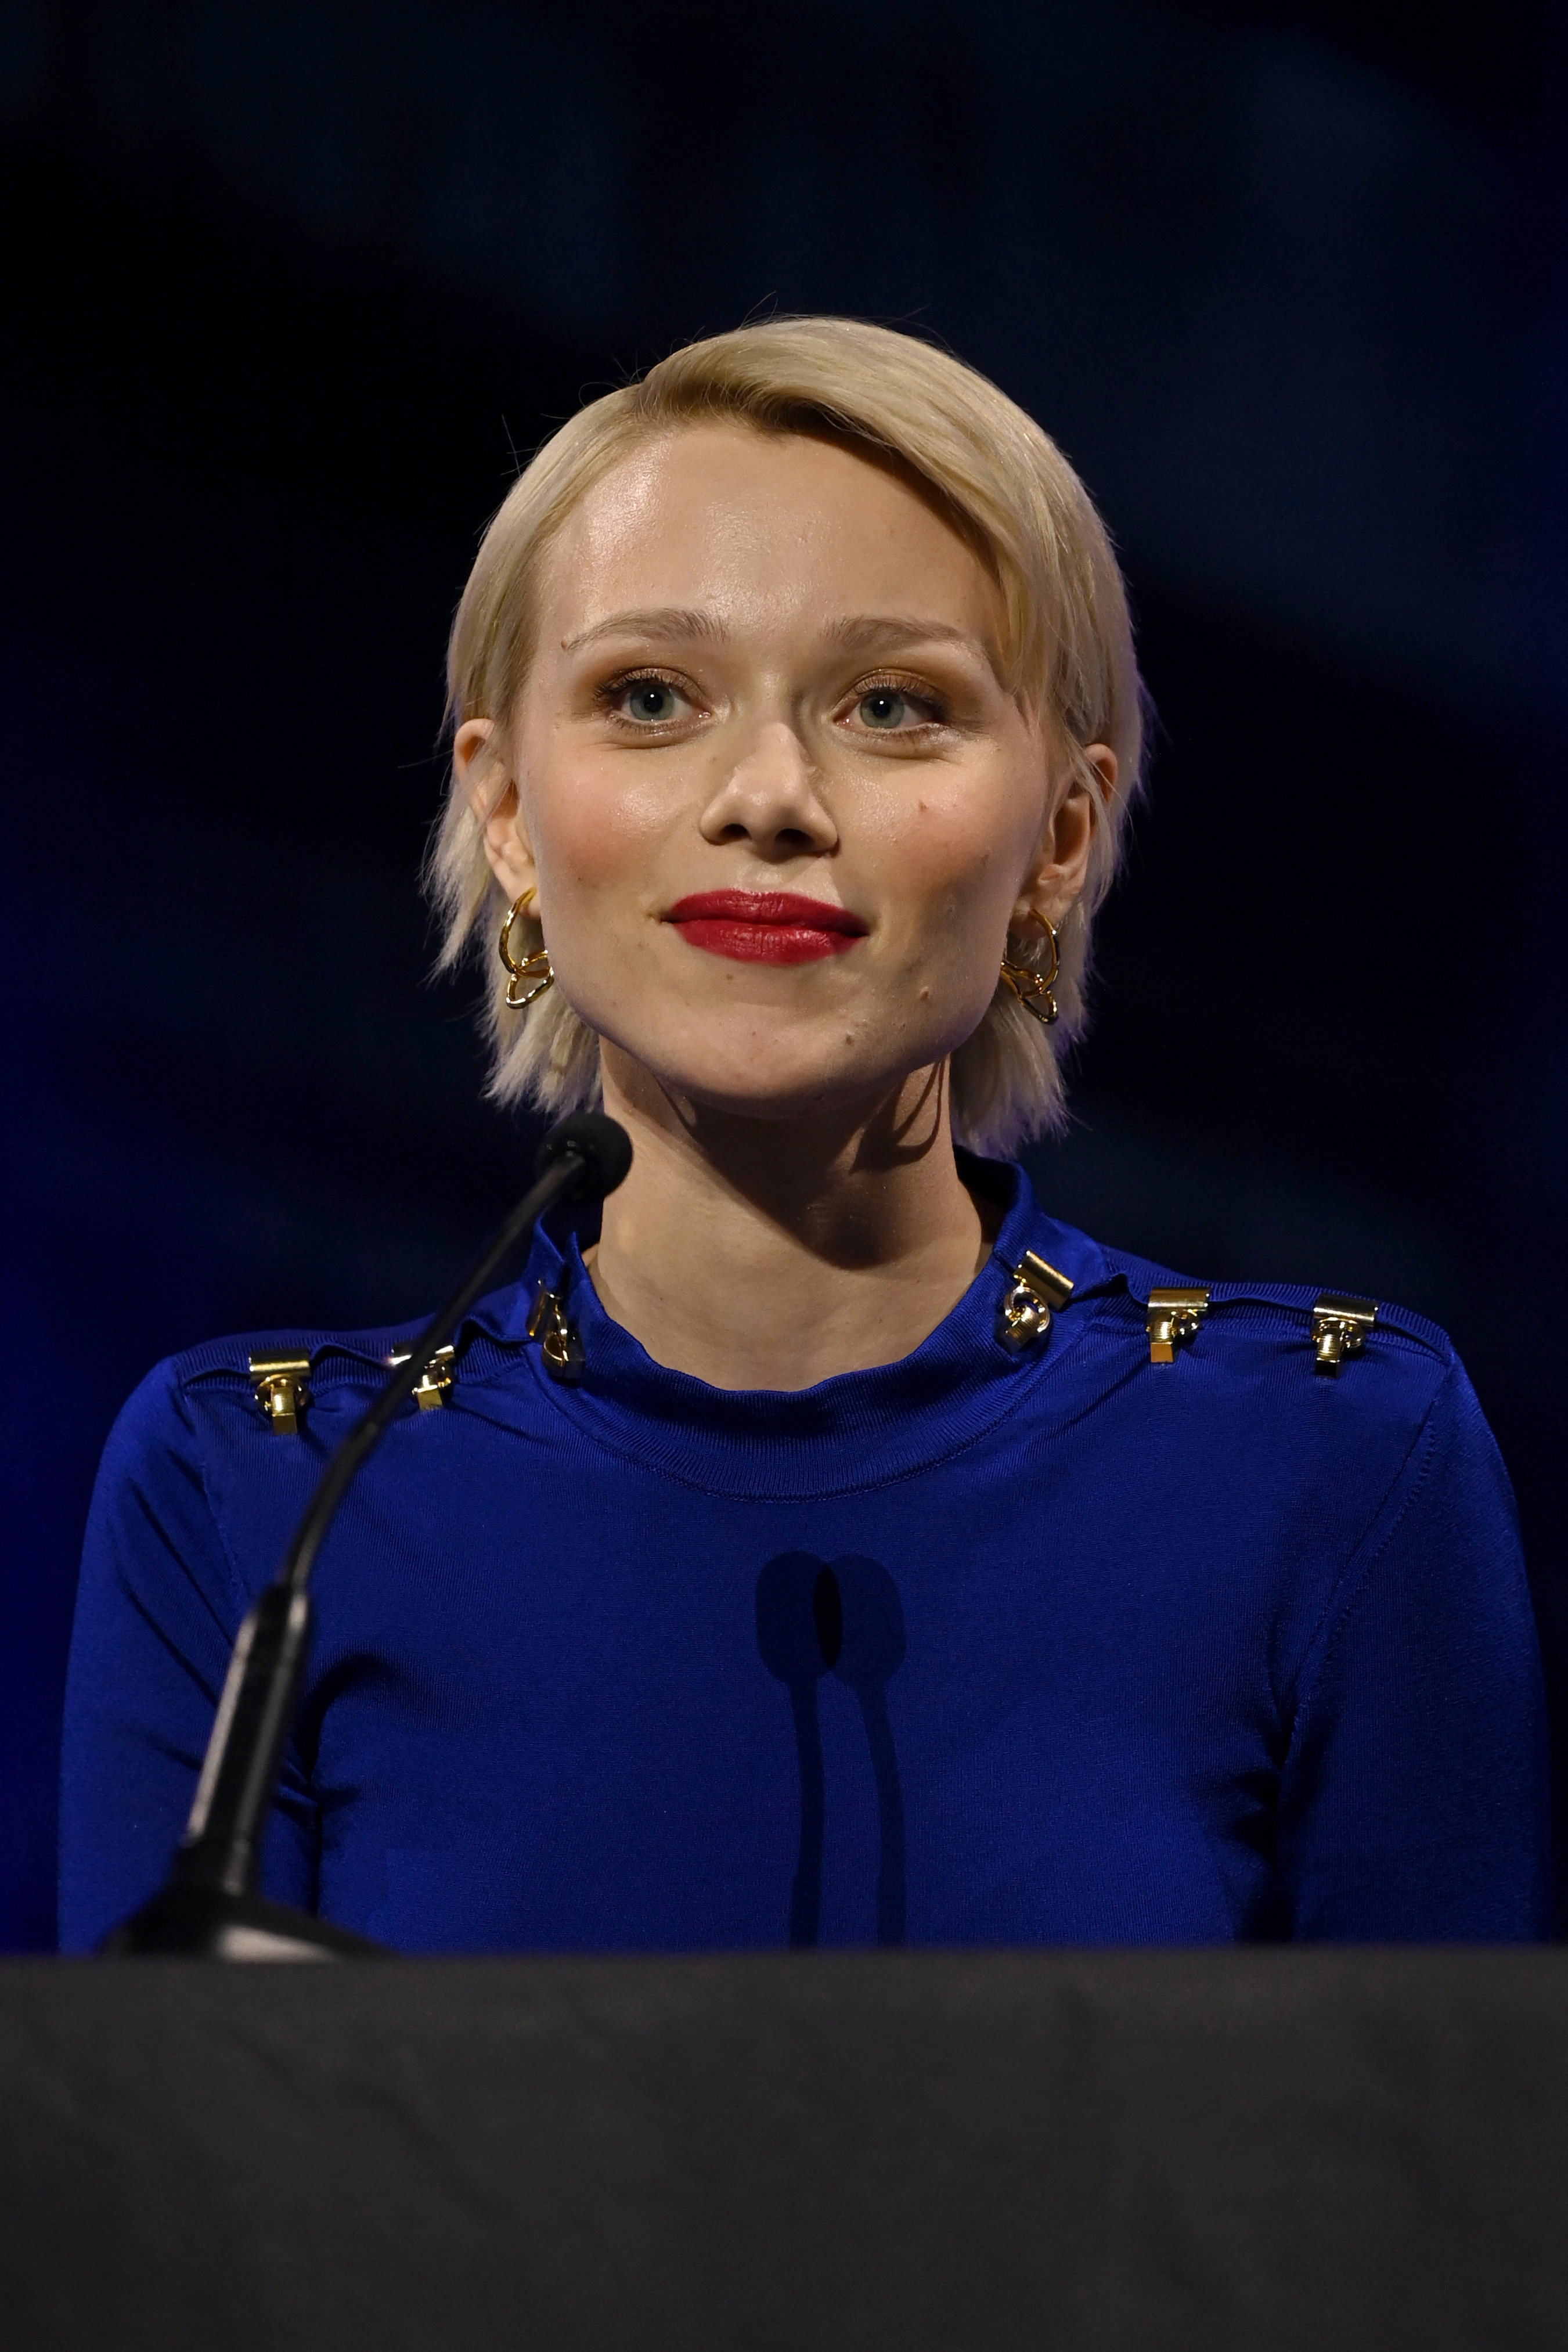 Ivanna Sakhno during the "Ahsoka" panel at the Star Wars Celebration on April 8, 2023, in London, England. | Source: Getty Images